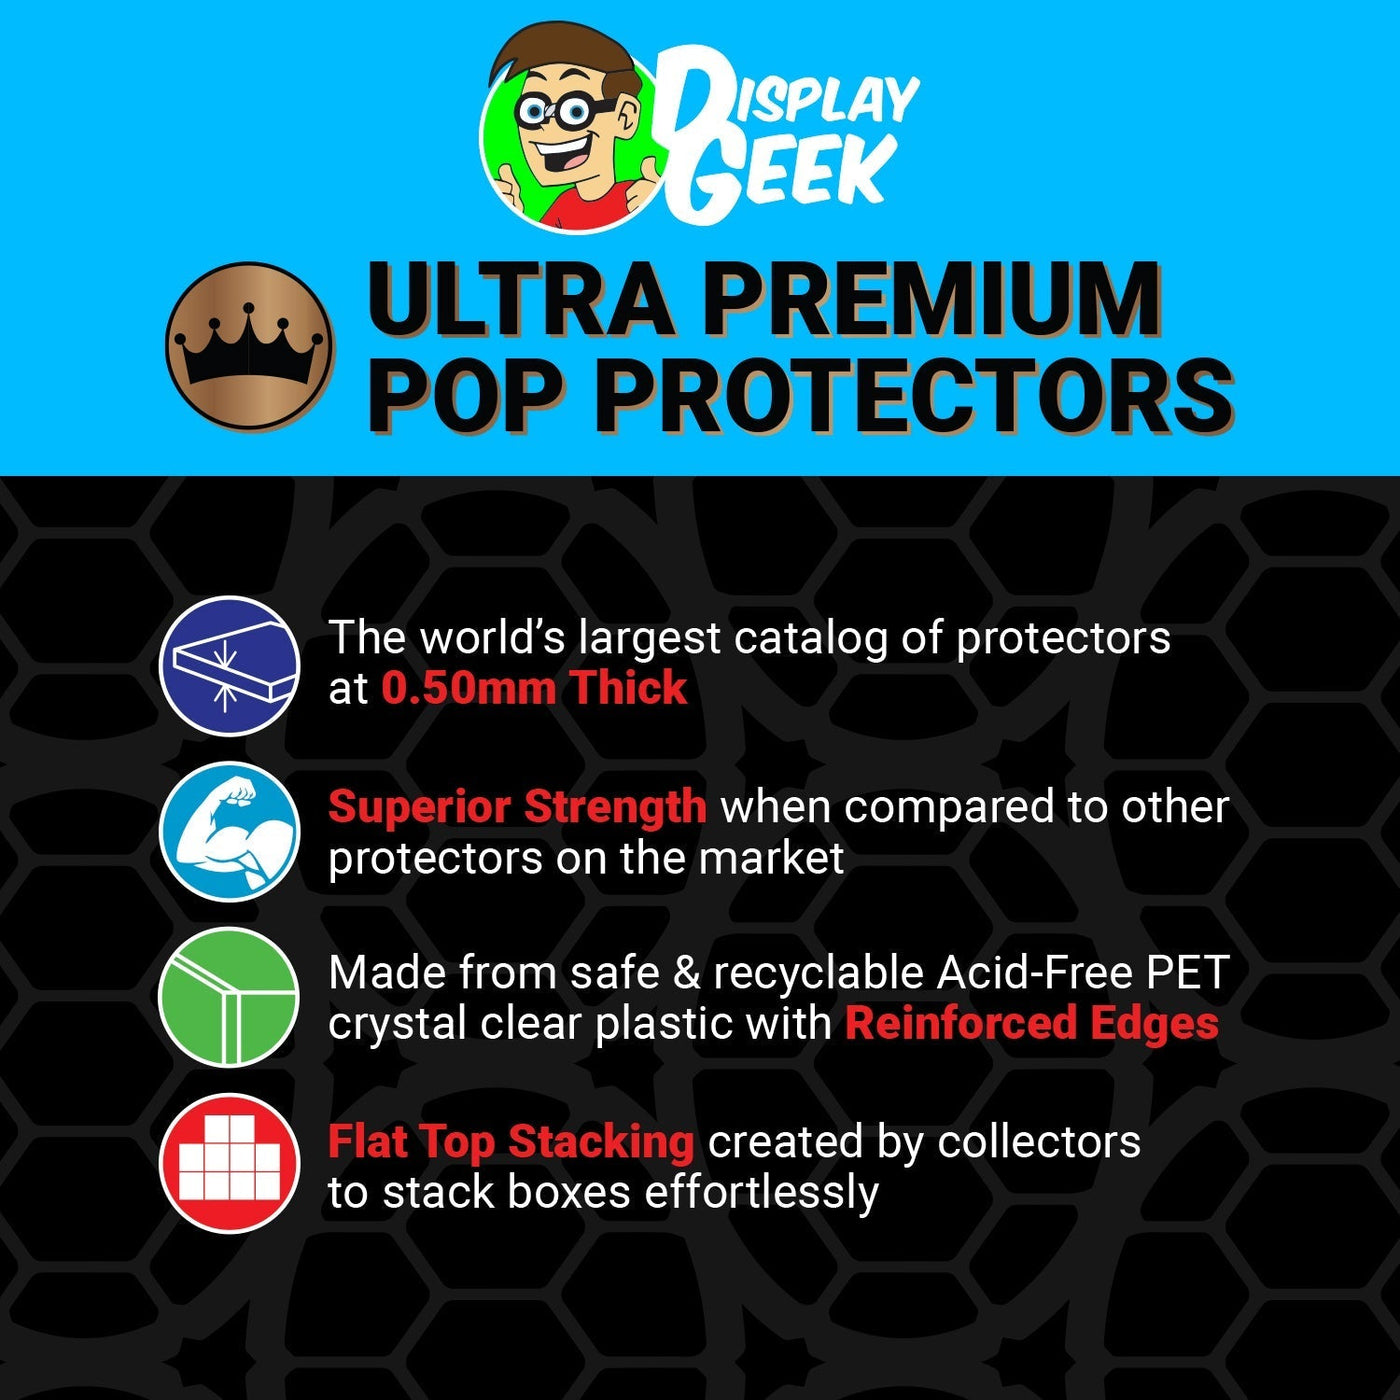 Pop Protector for Batman & The Joker Dark Knight #18 Funko Pop Movie Posters on The Protector Guide App by Display Geek